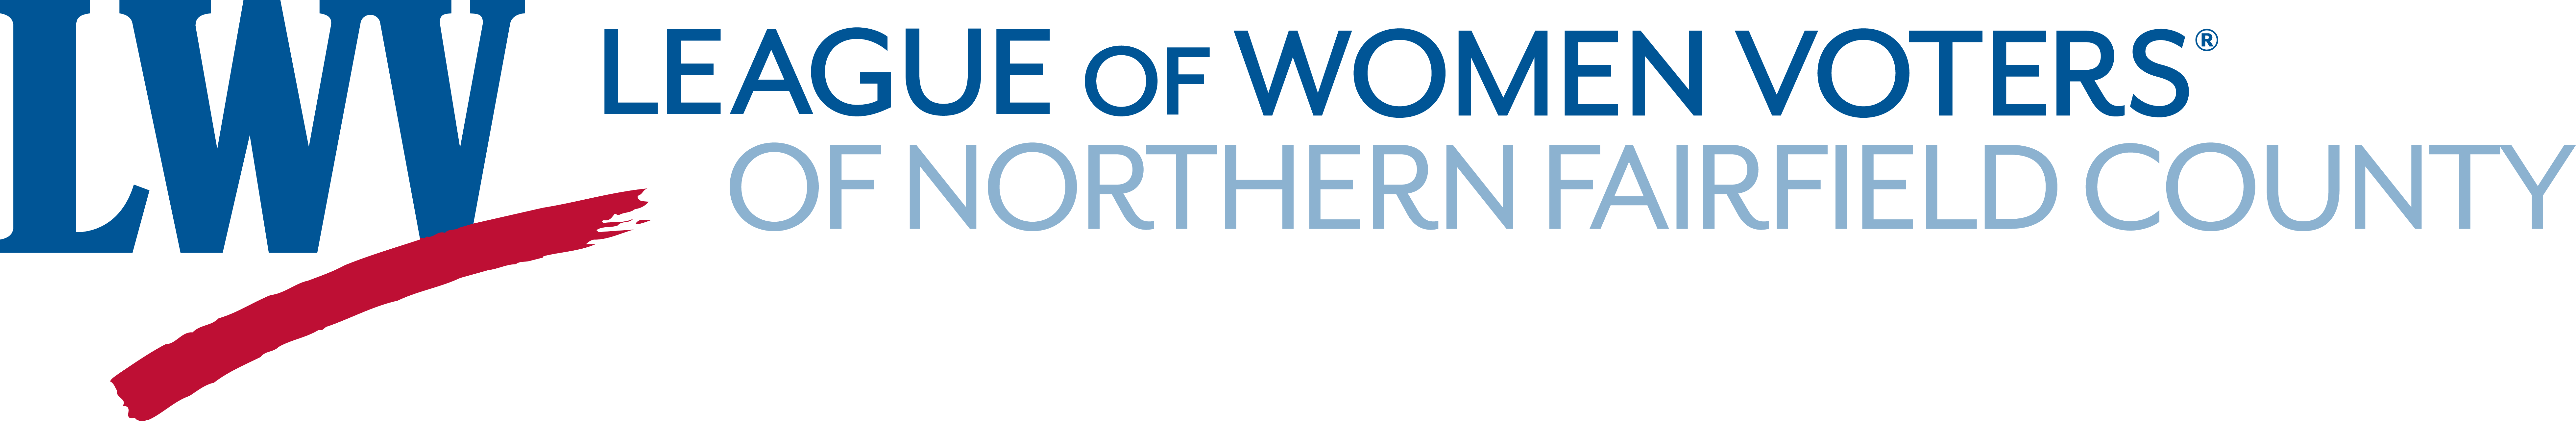 Logo for League of Women Voters of Northern Fairfield County